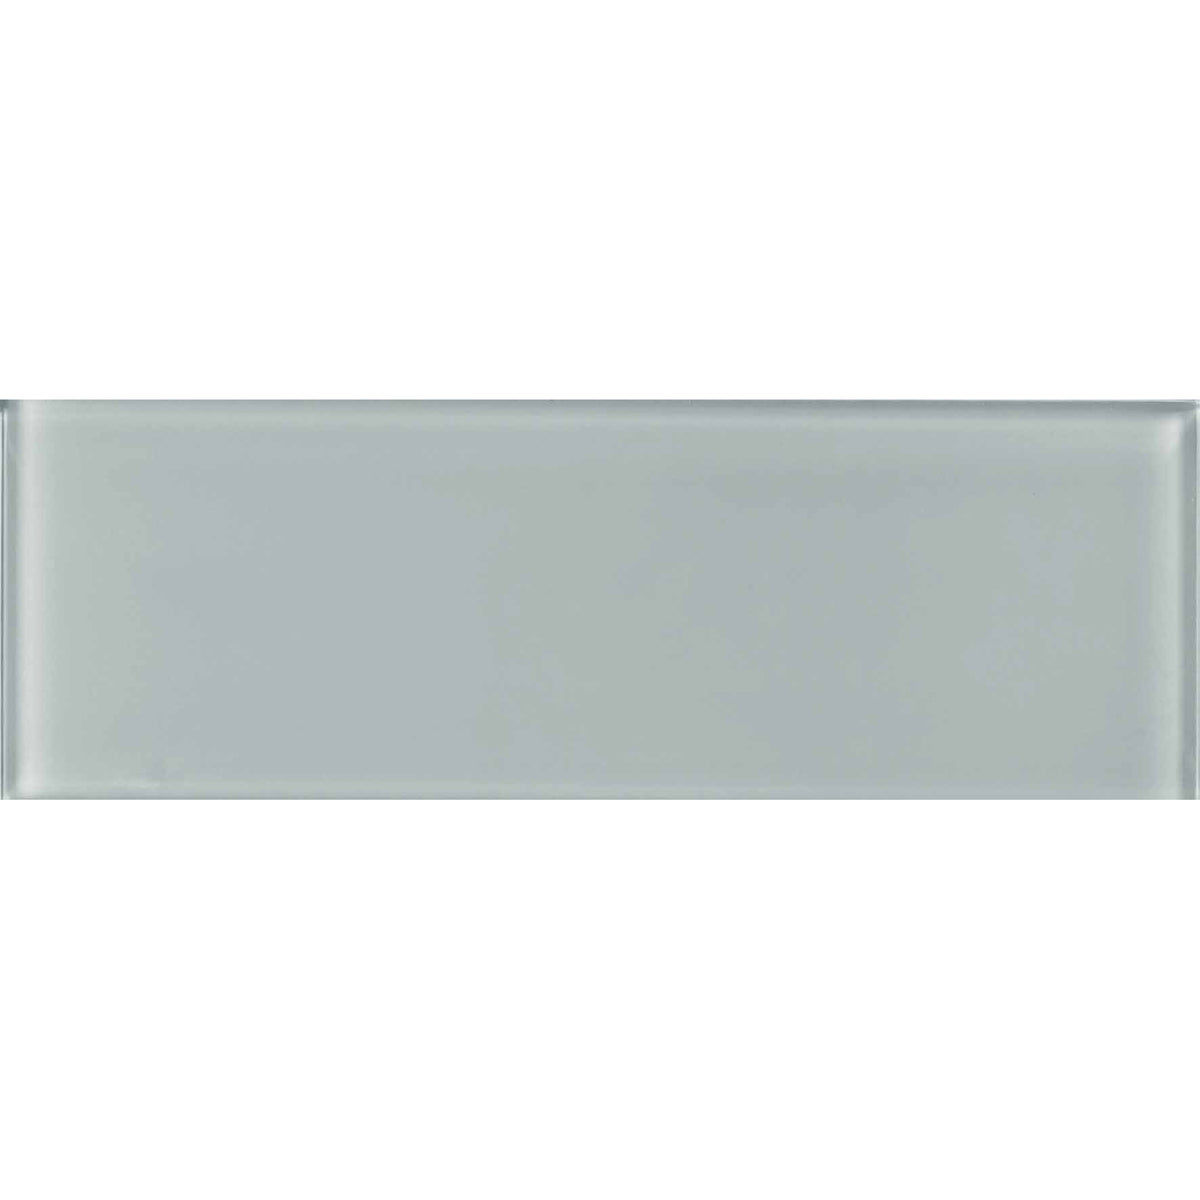 Anatolia - Element Tidal Glass Wall Tiles 8 in. x 24 in. - Cloud